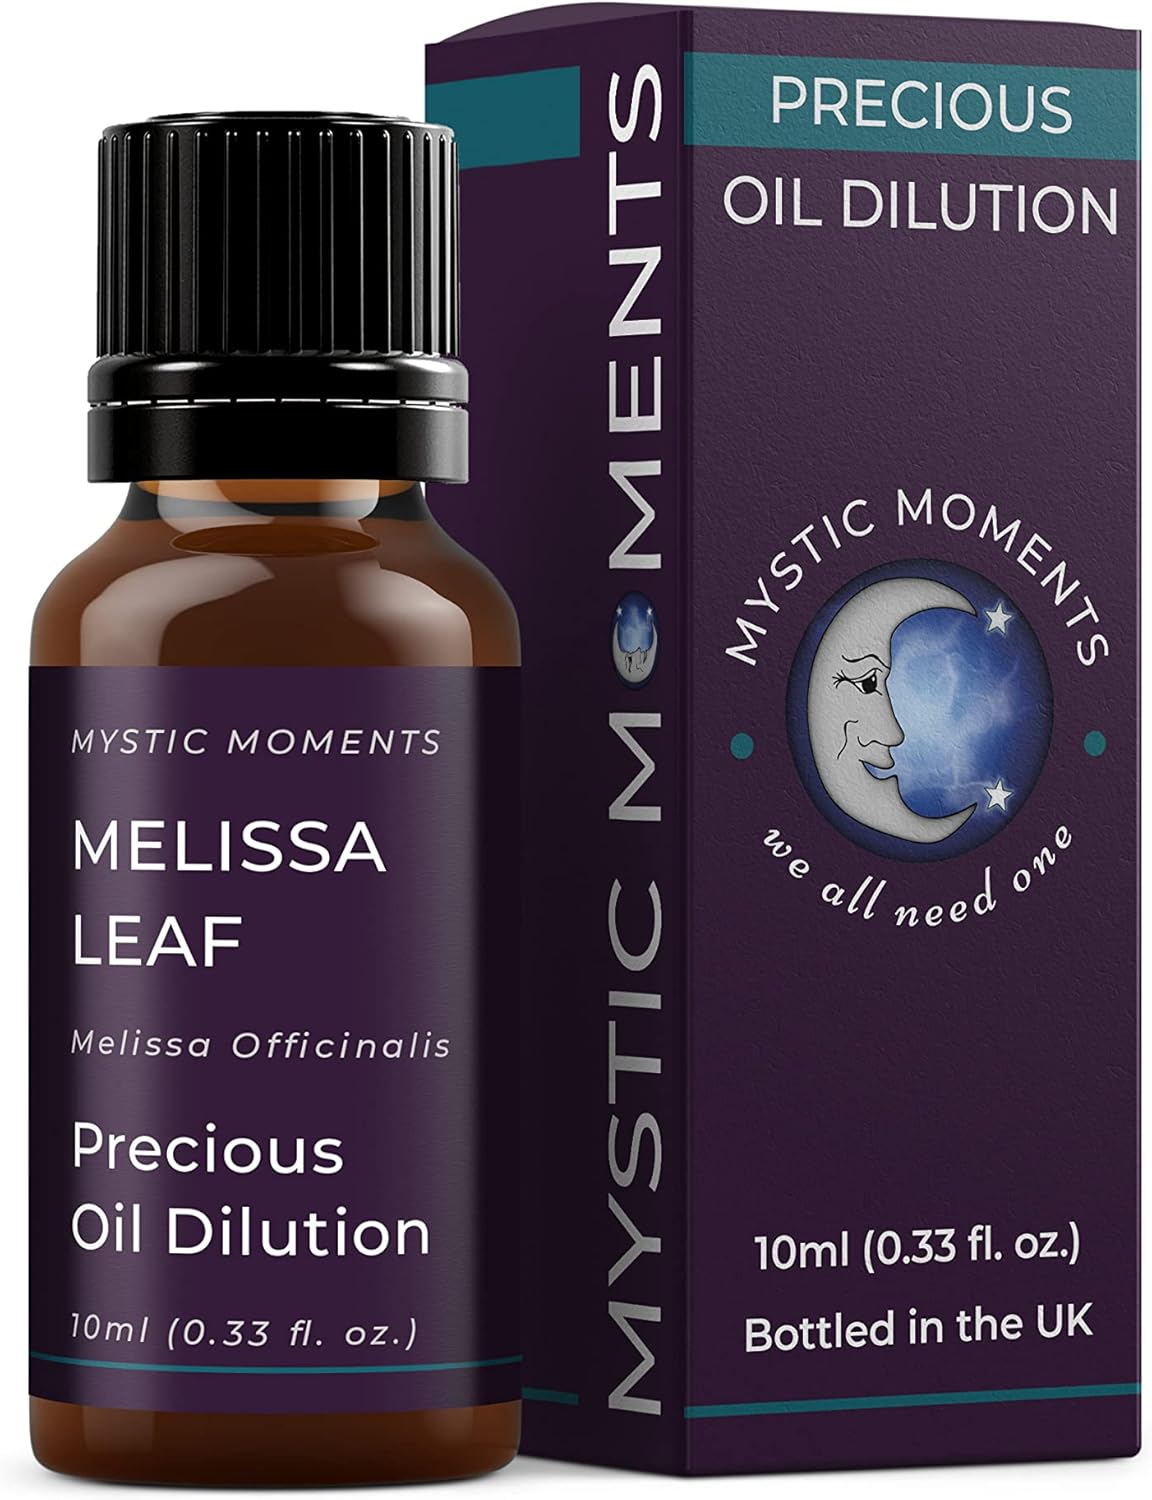 Mystic Moments | Melissa Leaf Precious Oil Dilution 10ml 3% Jojoba Blend Perfect for Massage, Skincare, Beauty and Aromatherapy